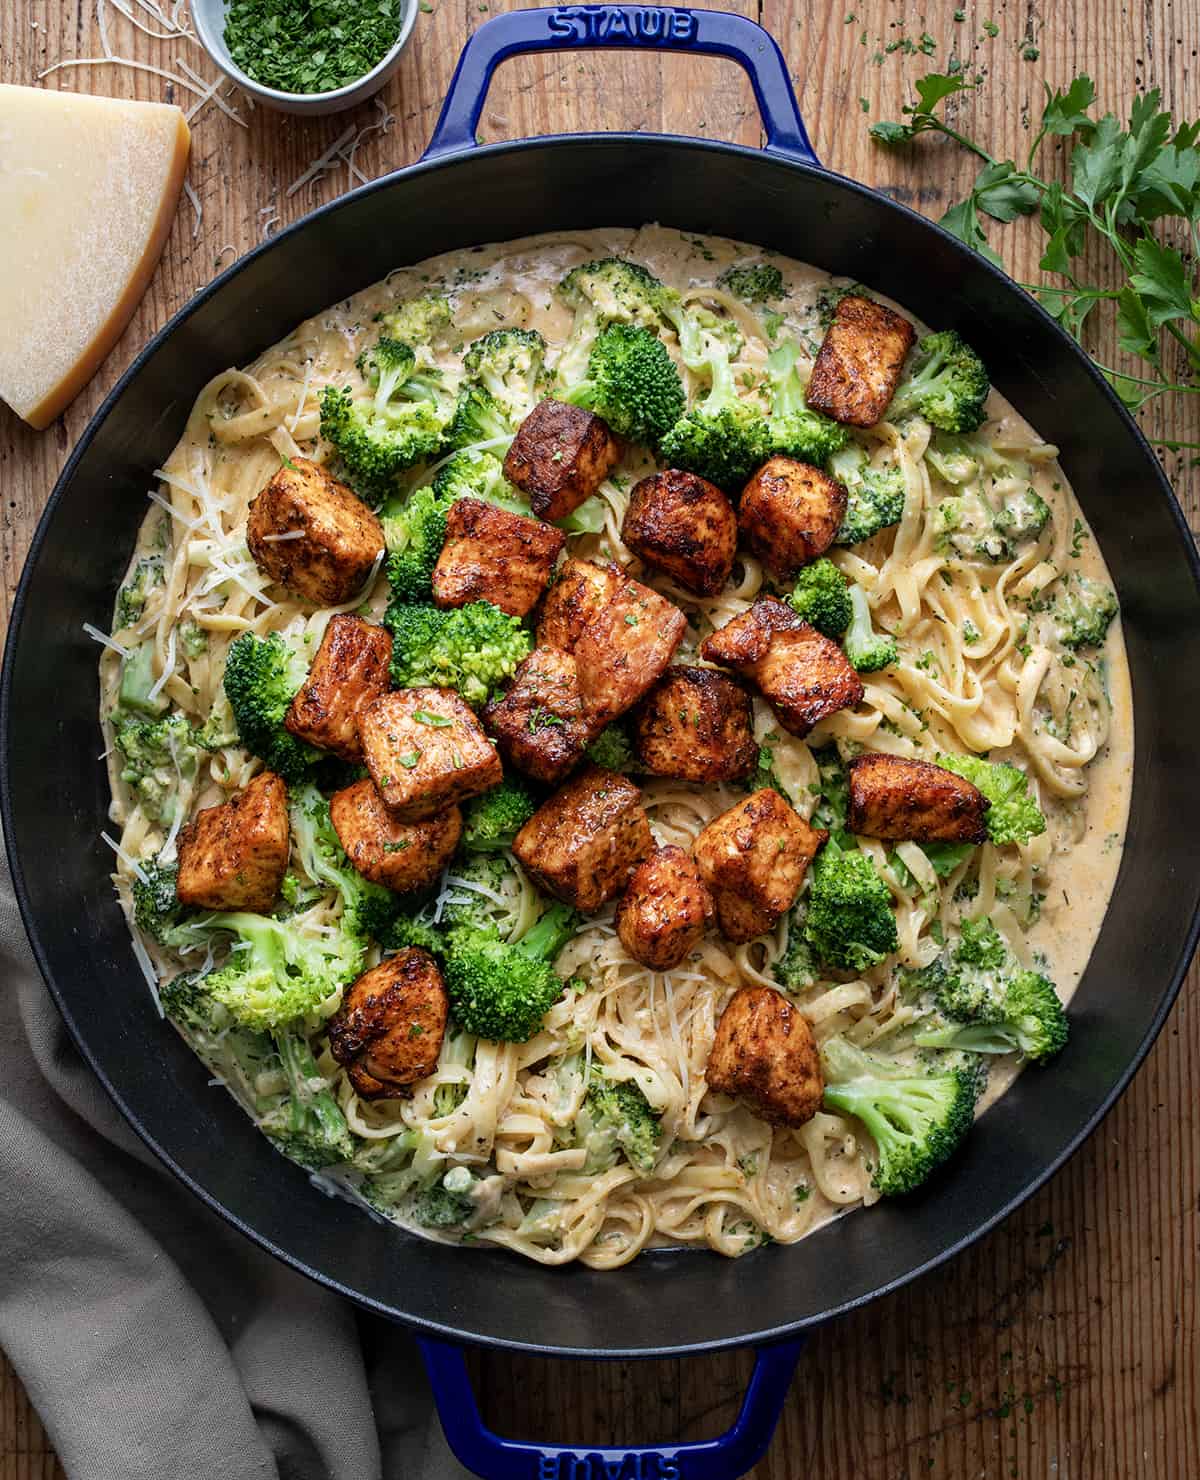 Skillet of Blackened Salmon and Broccoli Alfredo on a Table from Overhead with Parmesan Near.
